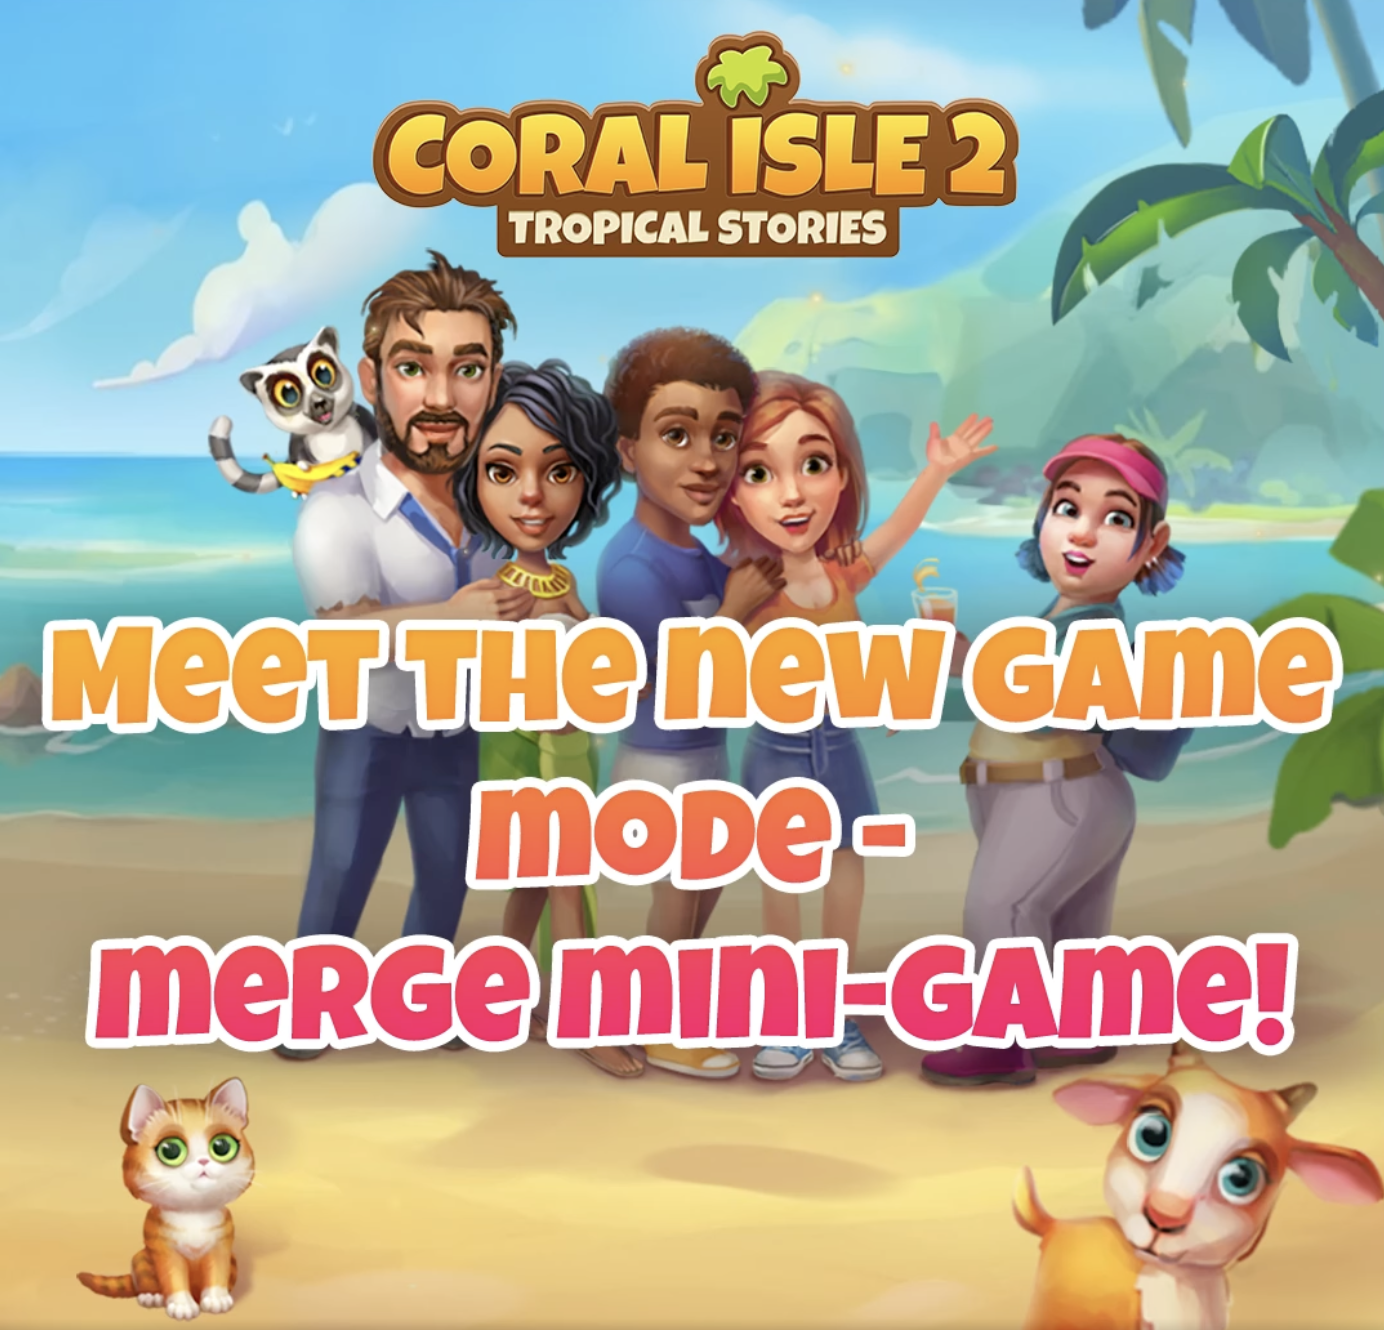 New game mode image